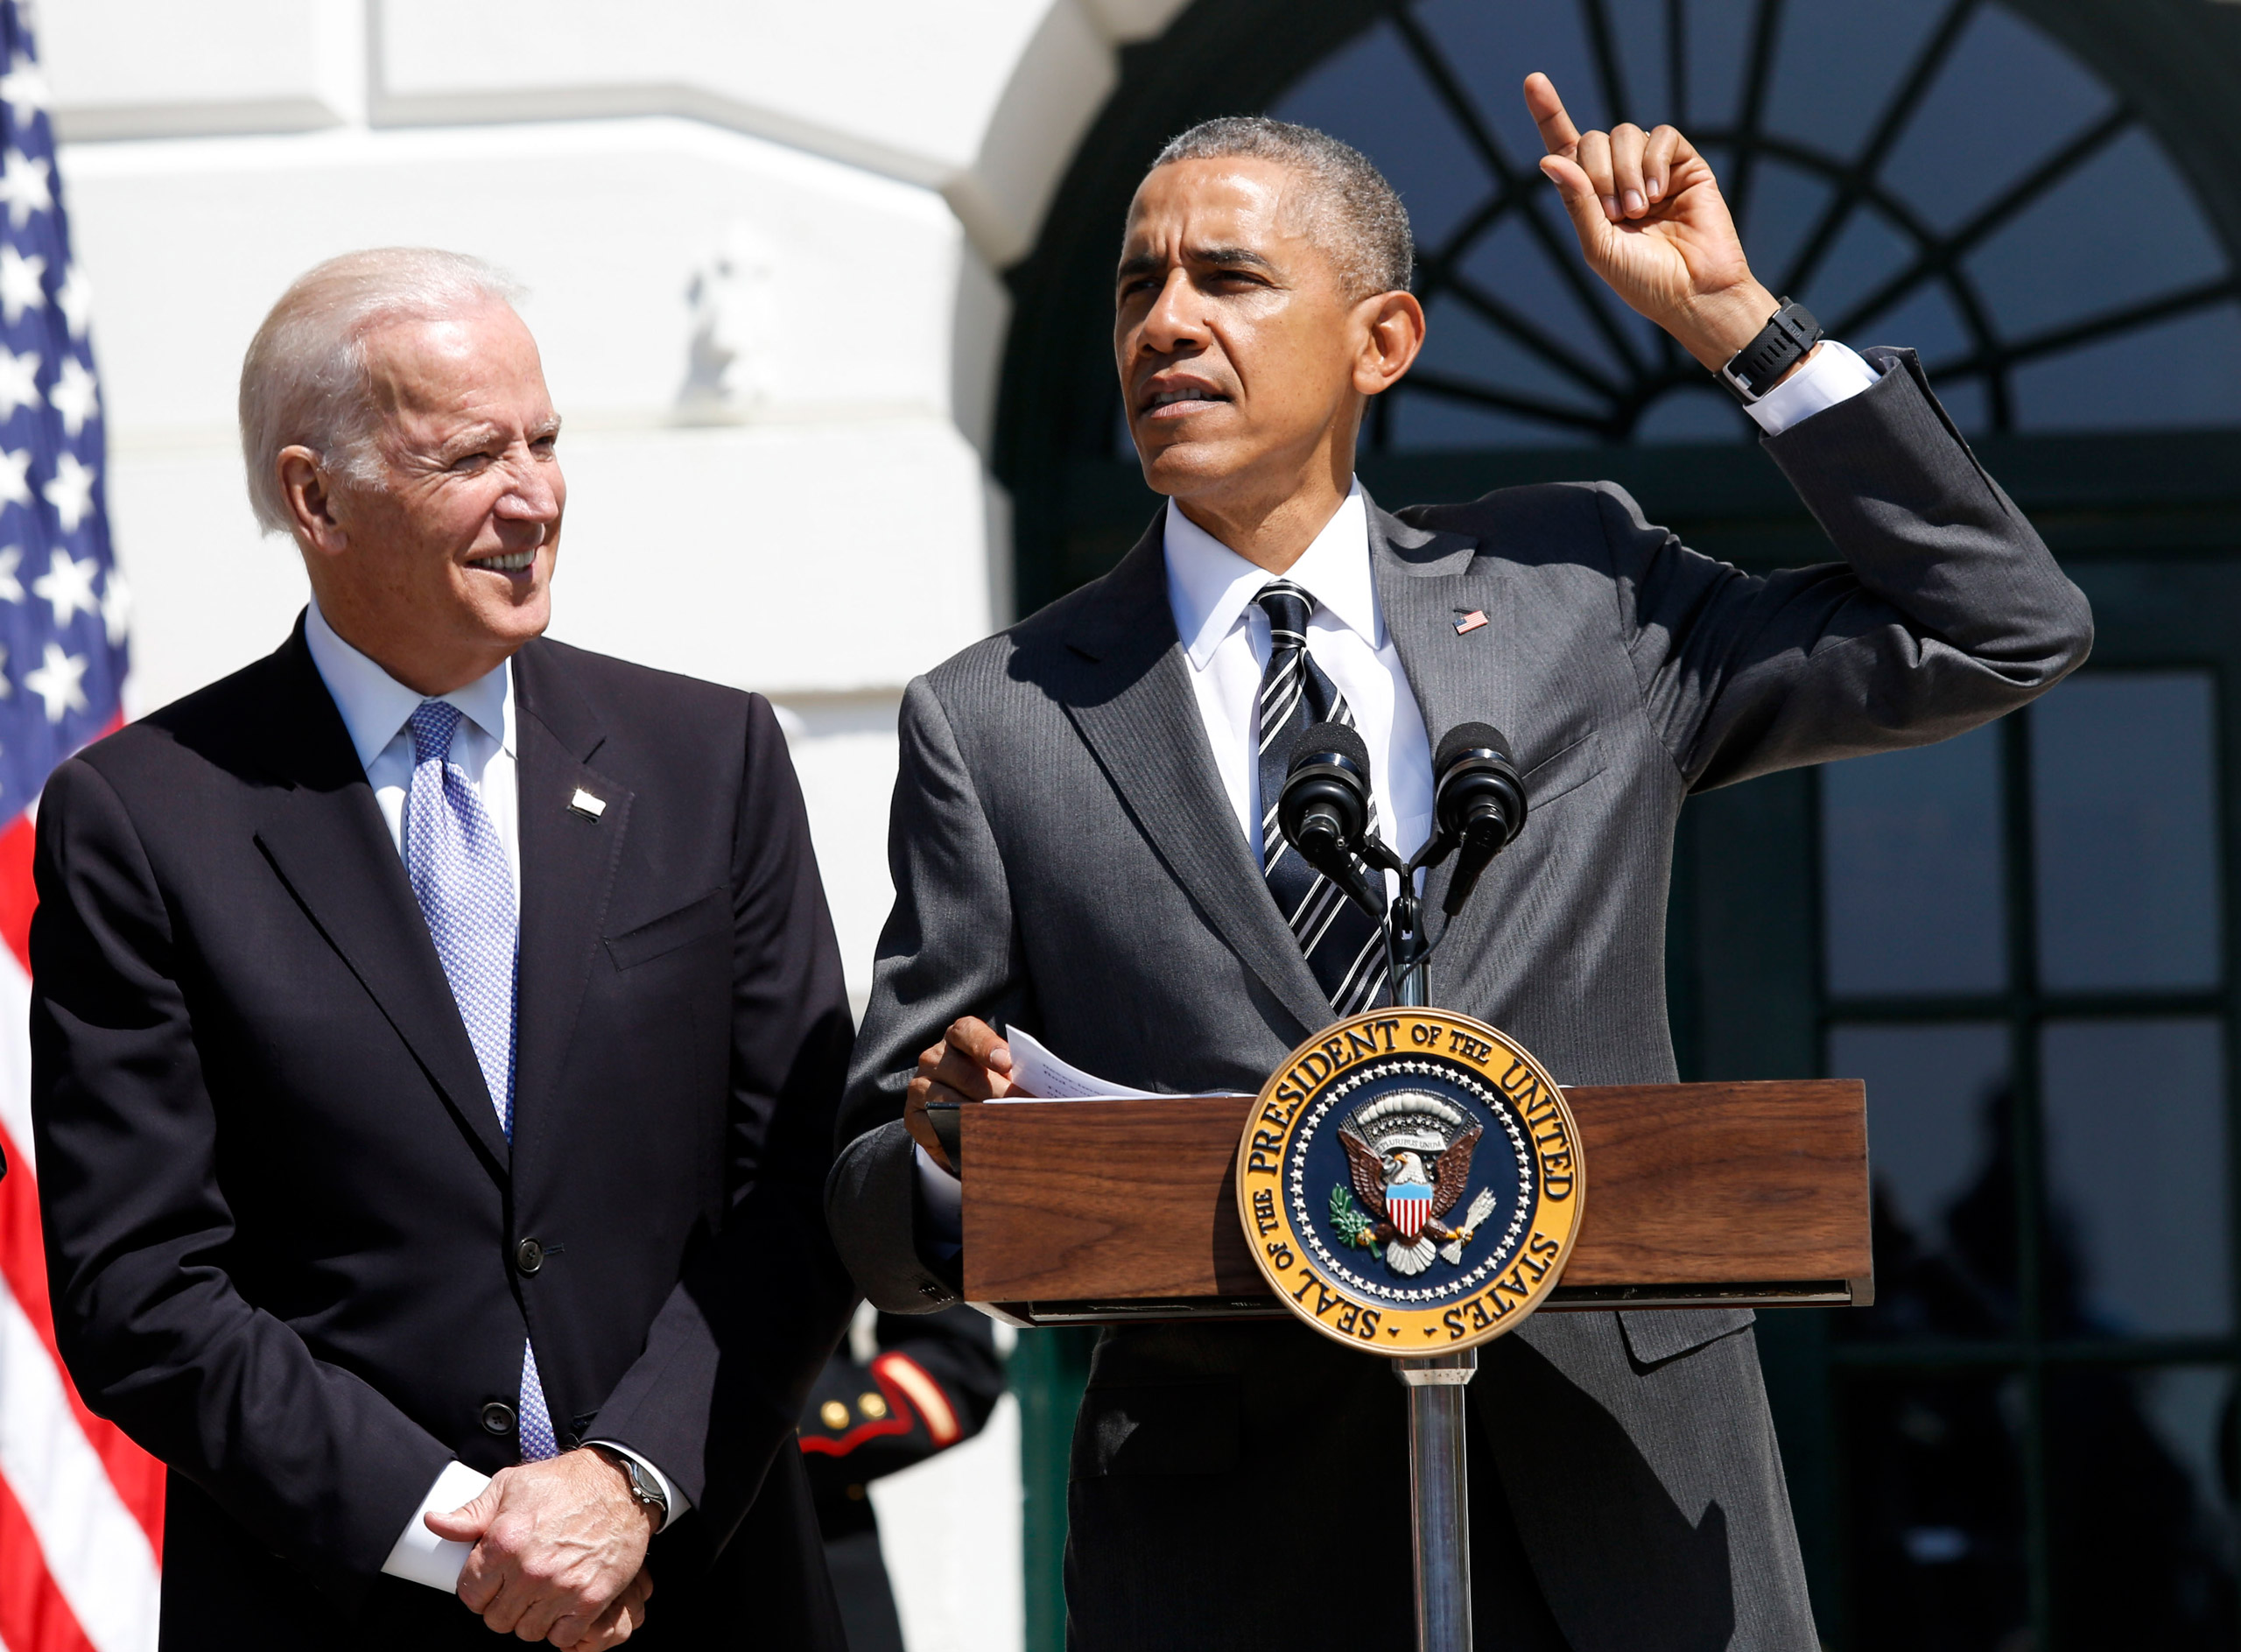 Barack Obama And Joe Biden Welcome Participants To The Wounded Warrior Ride - Washington